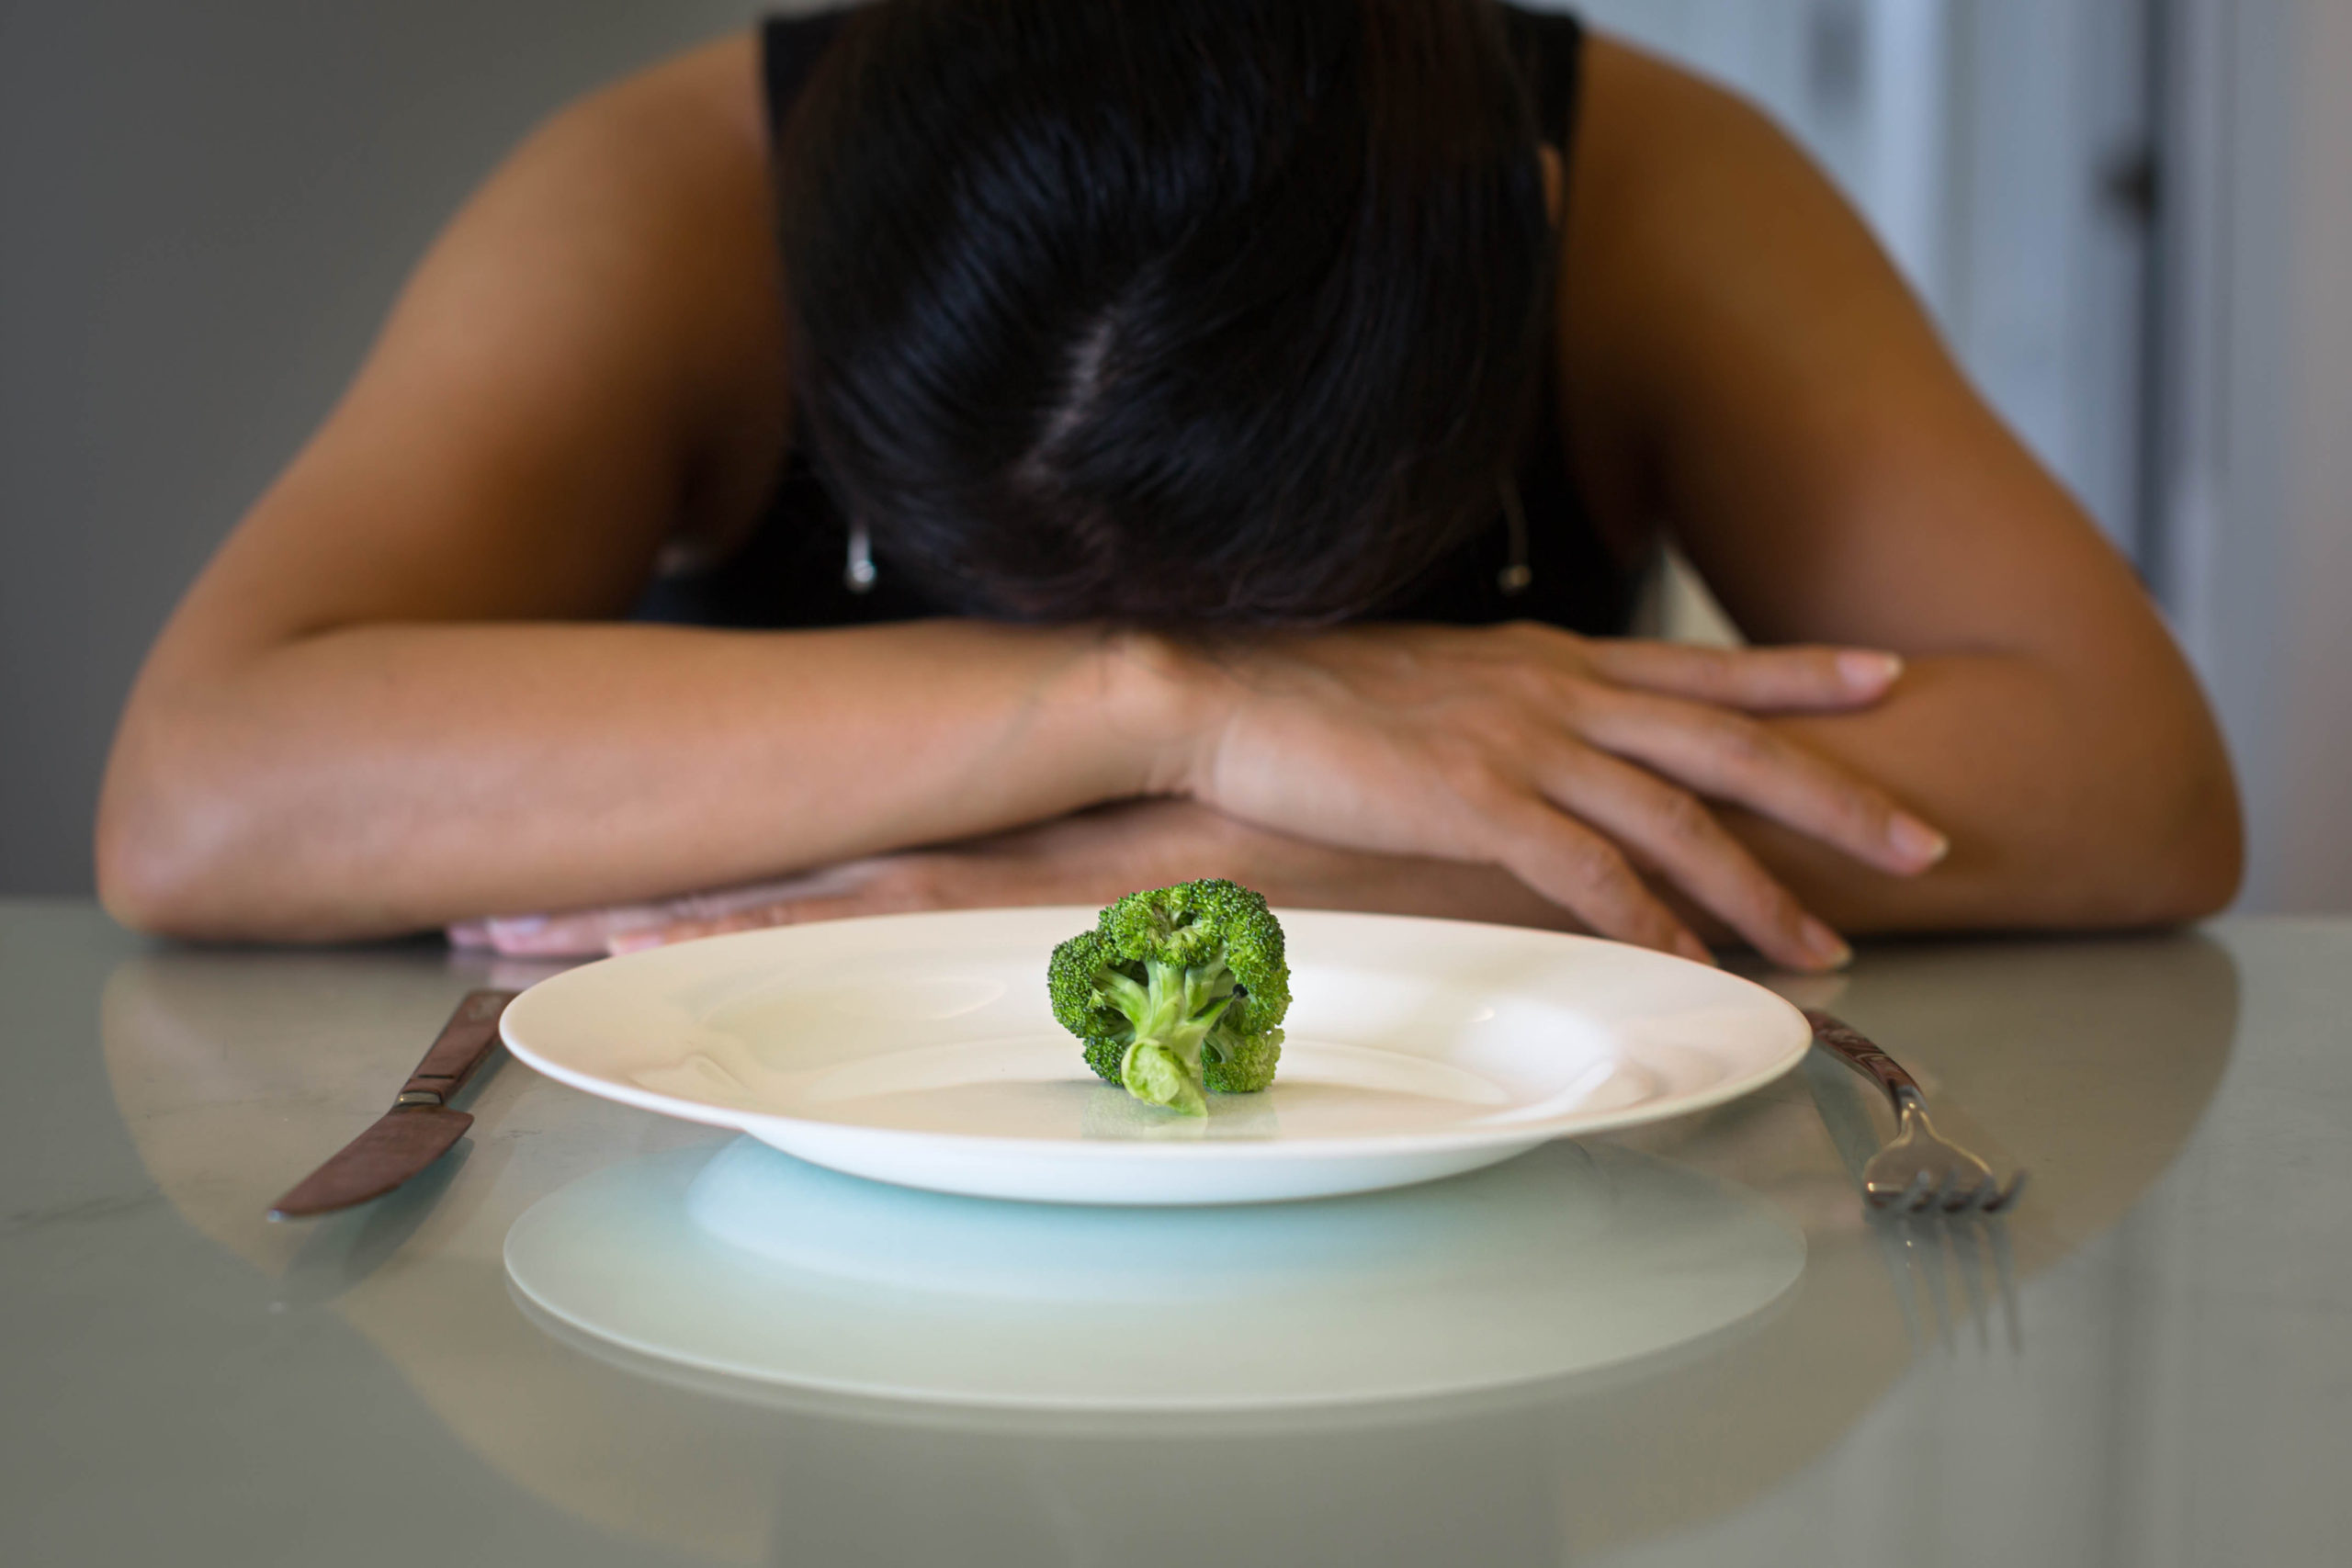 Depressed woman hungry from dieting, sitting in front of a empty plate. Weight loss diet. Its time for a change from the guilt and shame of disordered eating. An eating disorder therapist in East Cobb, GA can help. Learn about how bulimia nervosa treatment in East Cobb, GA or bulimia Nervosa treatment in Marietta can support you today!